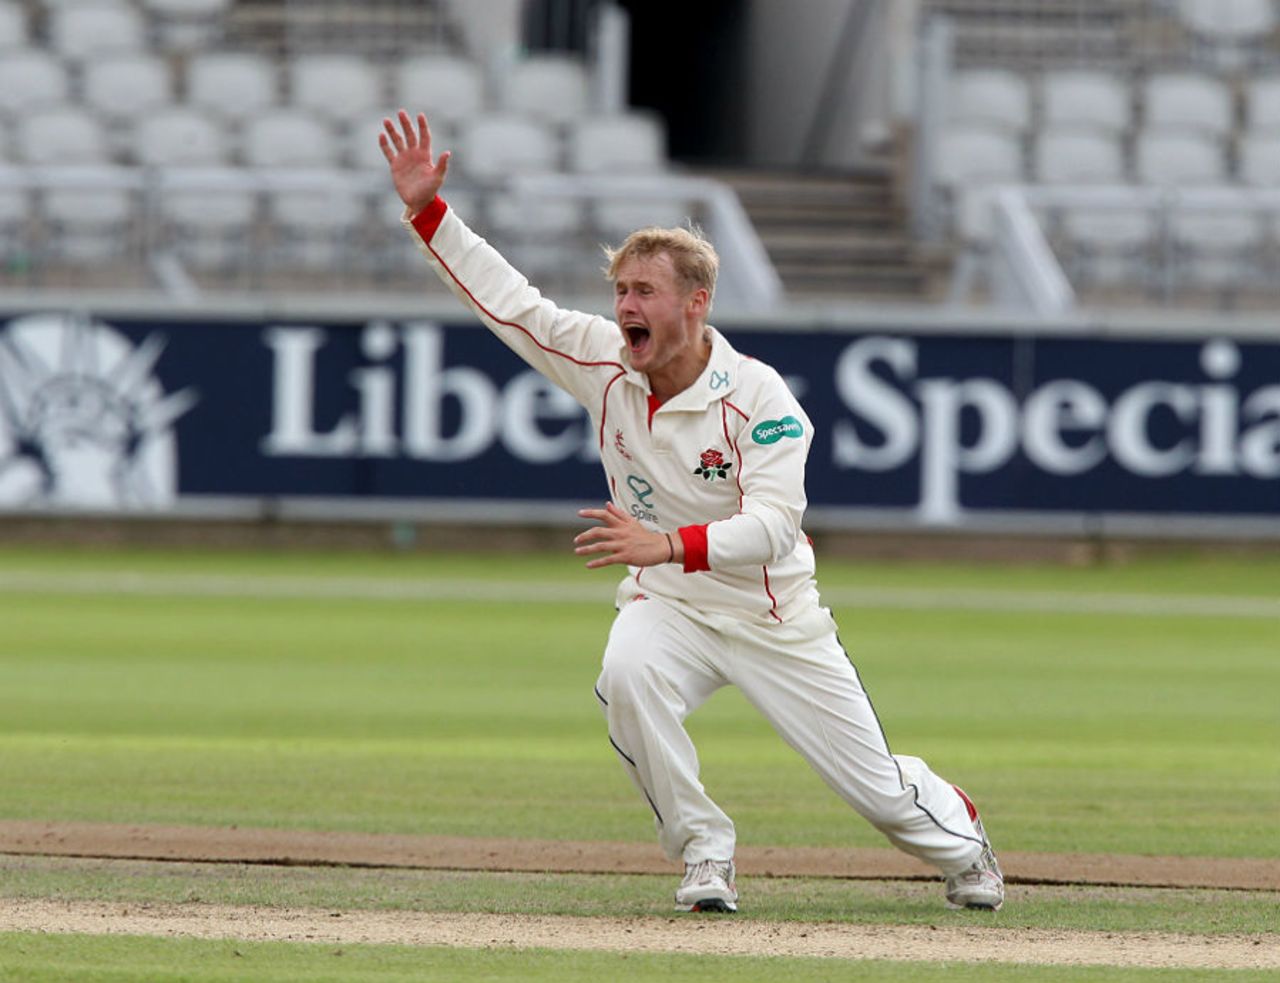 Matt Parkinson appeals for one of his five wickets, Lancashire v Warwickshire, Specsavers County Championship Division One, Old Trafford, 3rd day, June 22, 2016